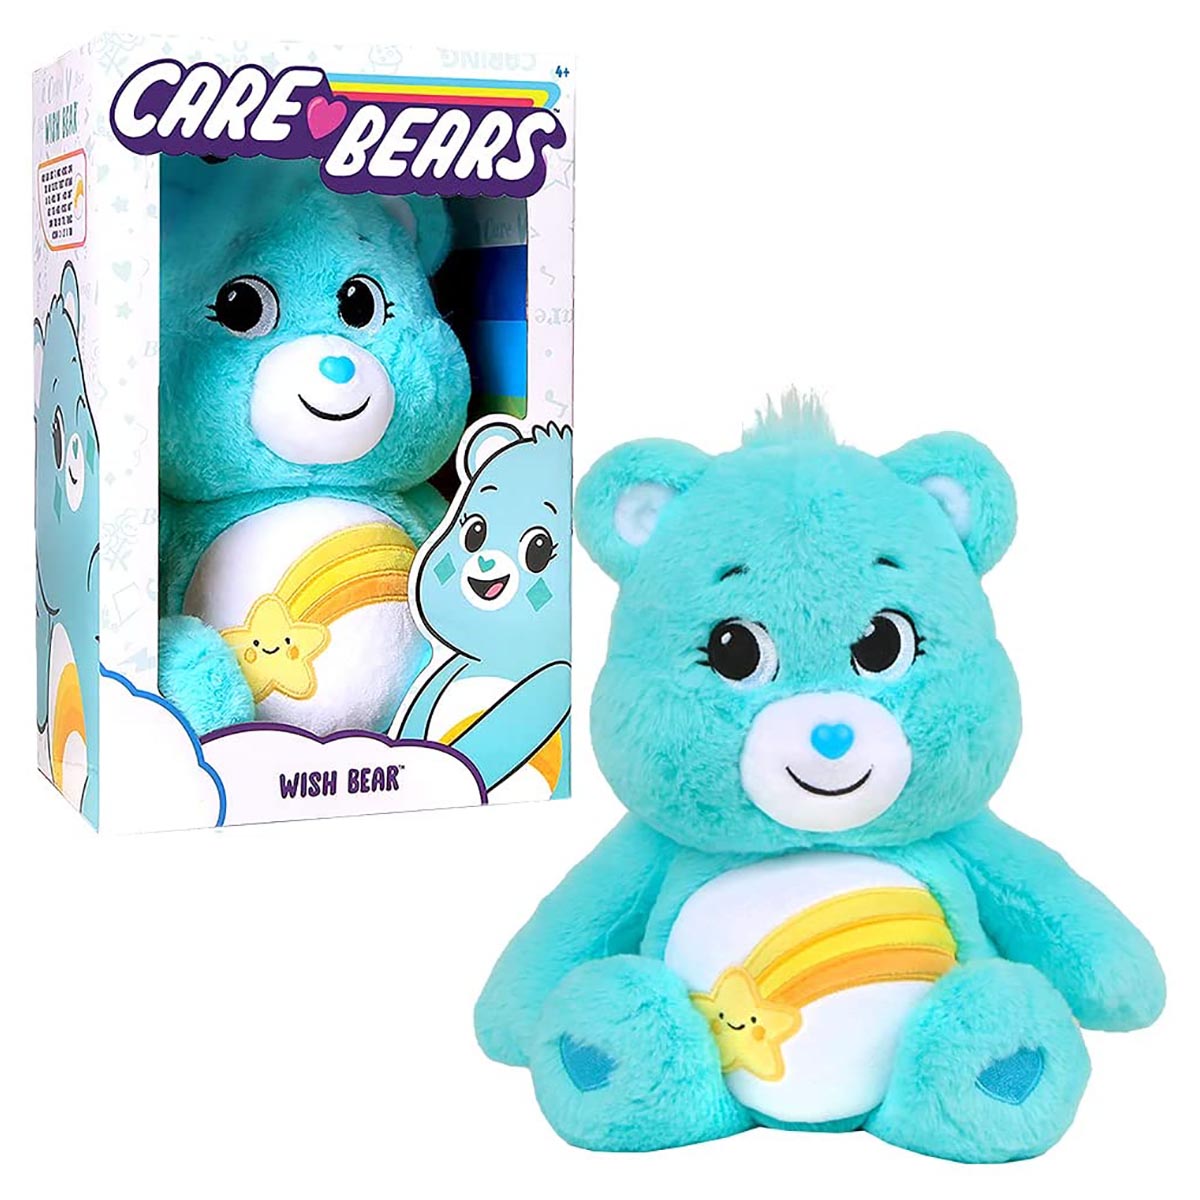 and 24/7 services Care Bears New 2021 14" Plush DoYourBest Bear Soft